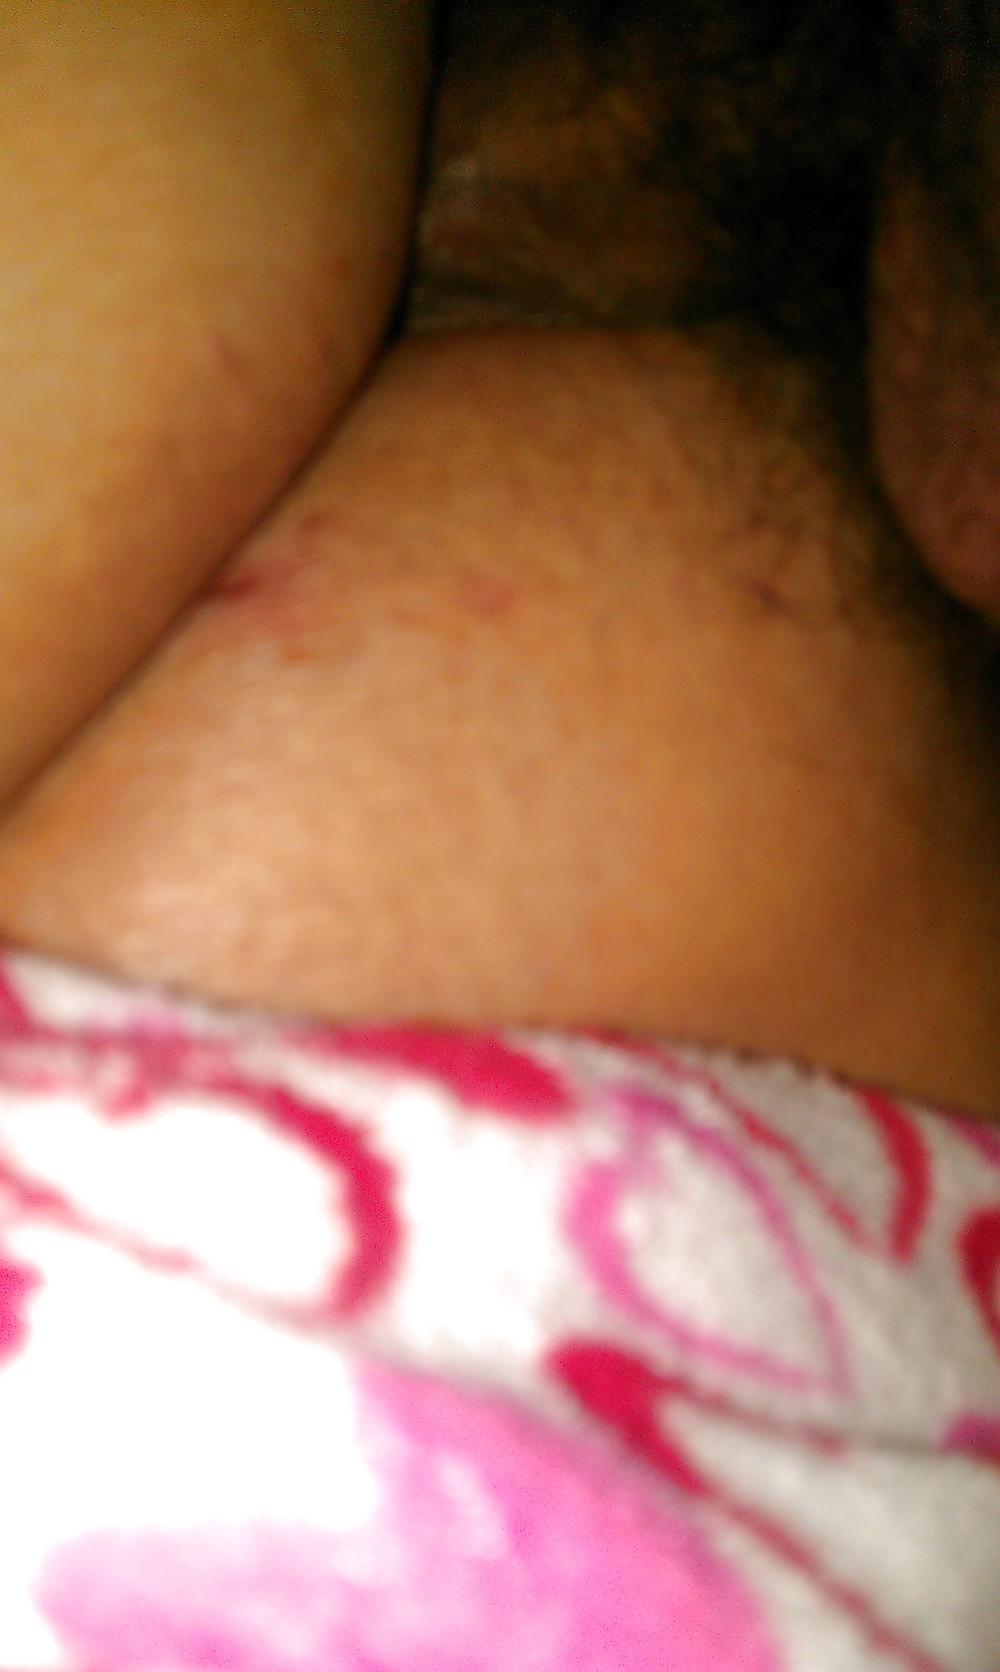 me fucking my wifes ass and pussy pict gal